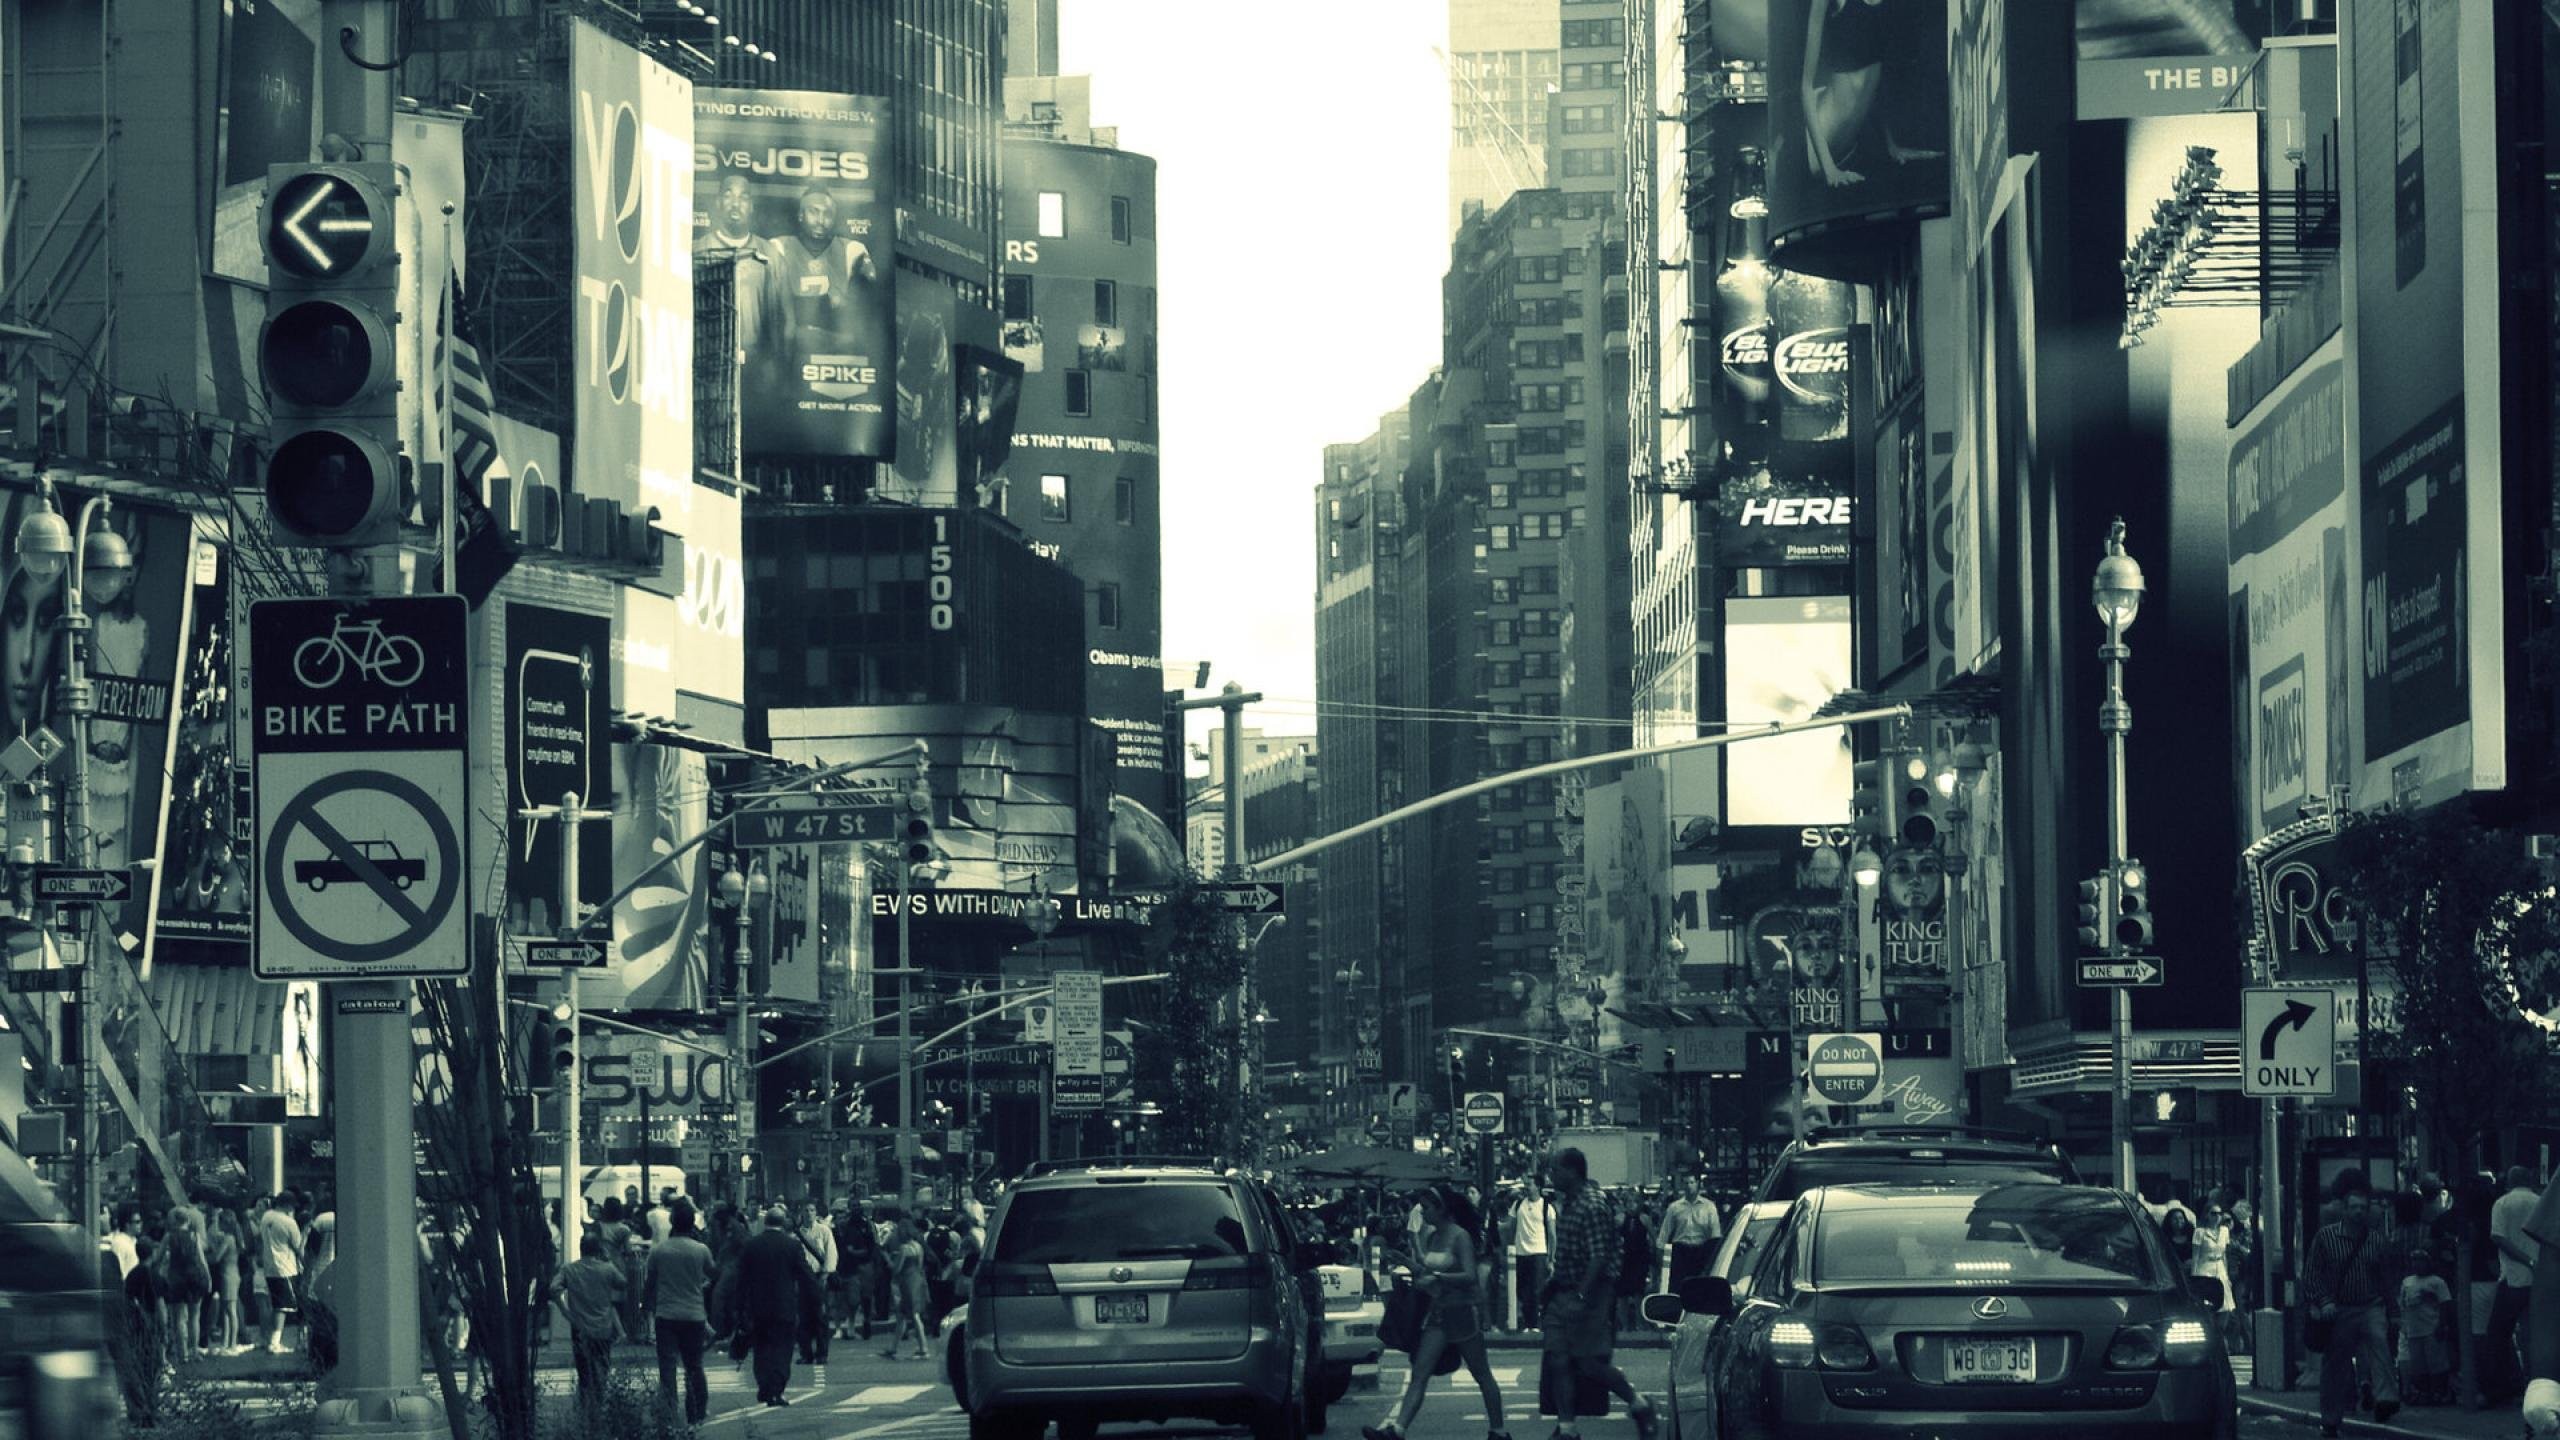 architecture, Monochrome, Building, New York City, USA, Street, Car, People, Crowds, Traffic Lights, Road Sign, Urban, Billboards, Filter Wallpaper